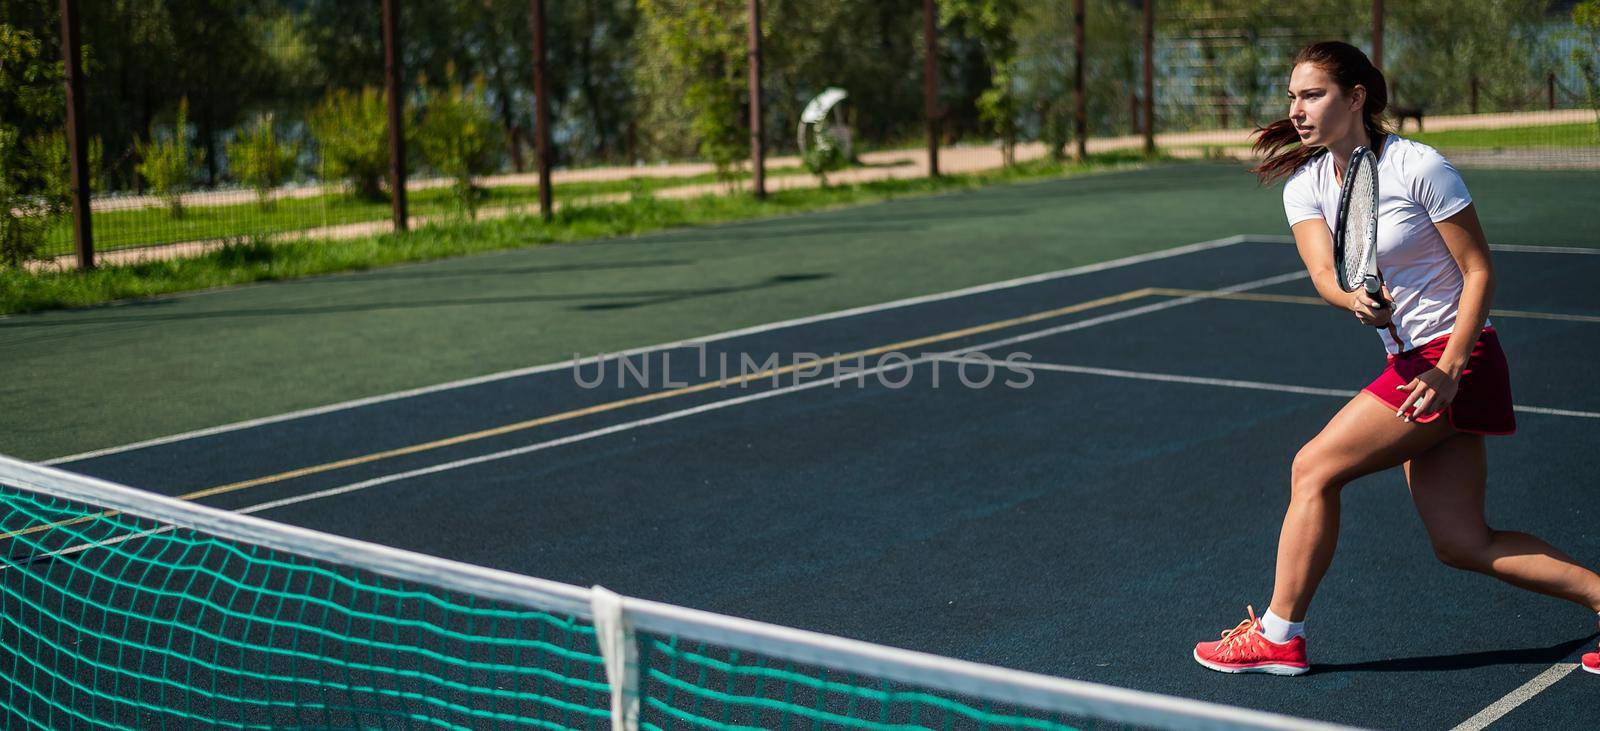 Sportive caucasian woman playing tennis on an outdoor court. Widescreen. by mrwed54